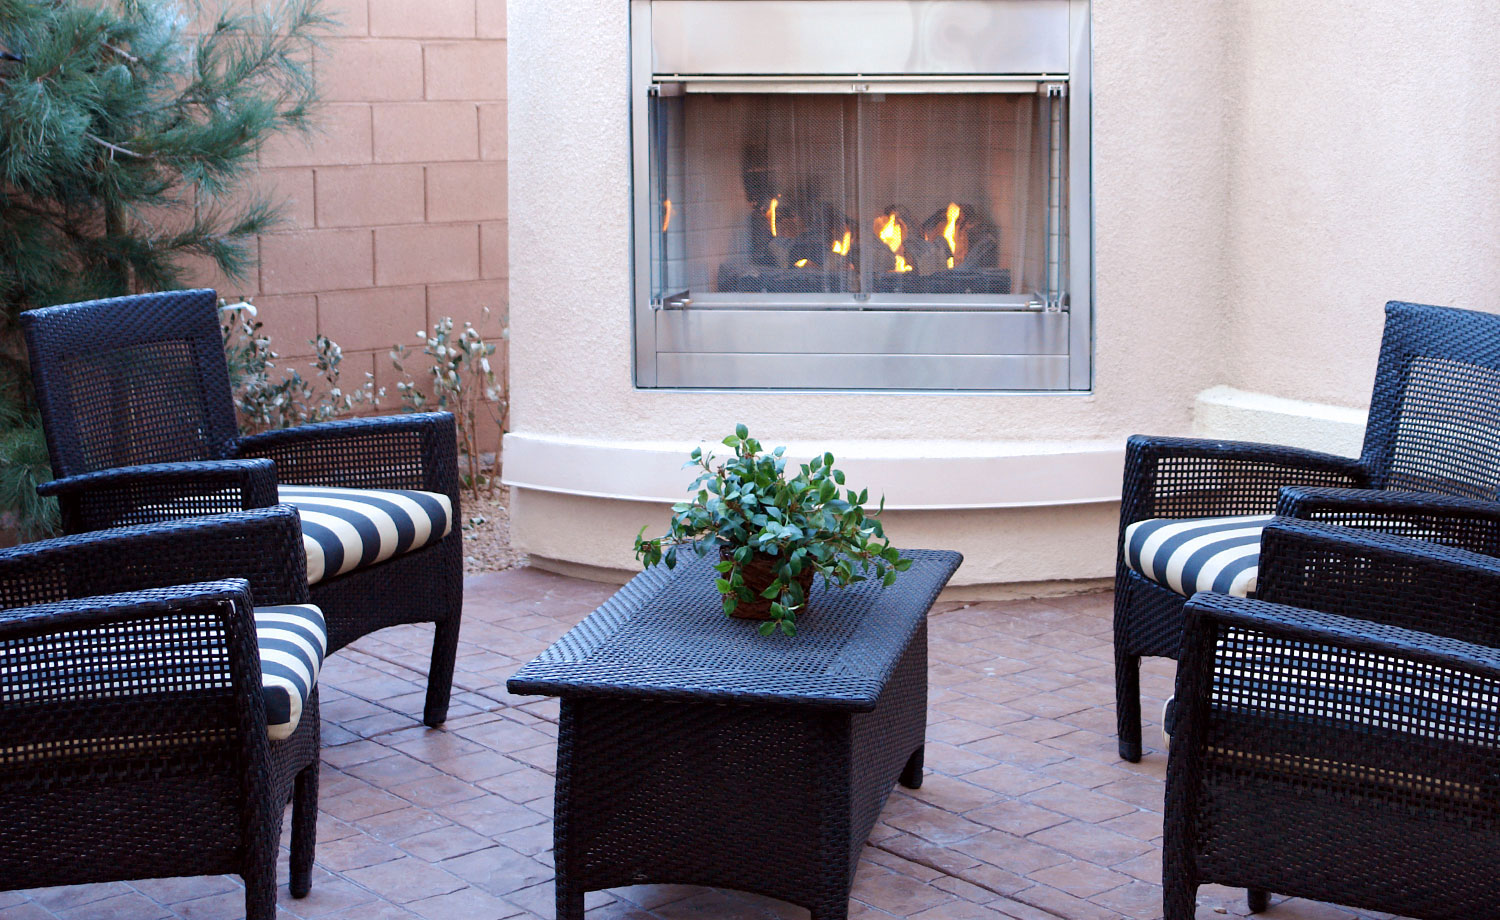 Outdoor seating area with fireplace.